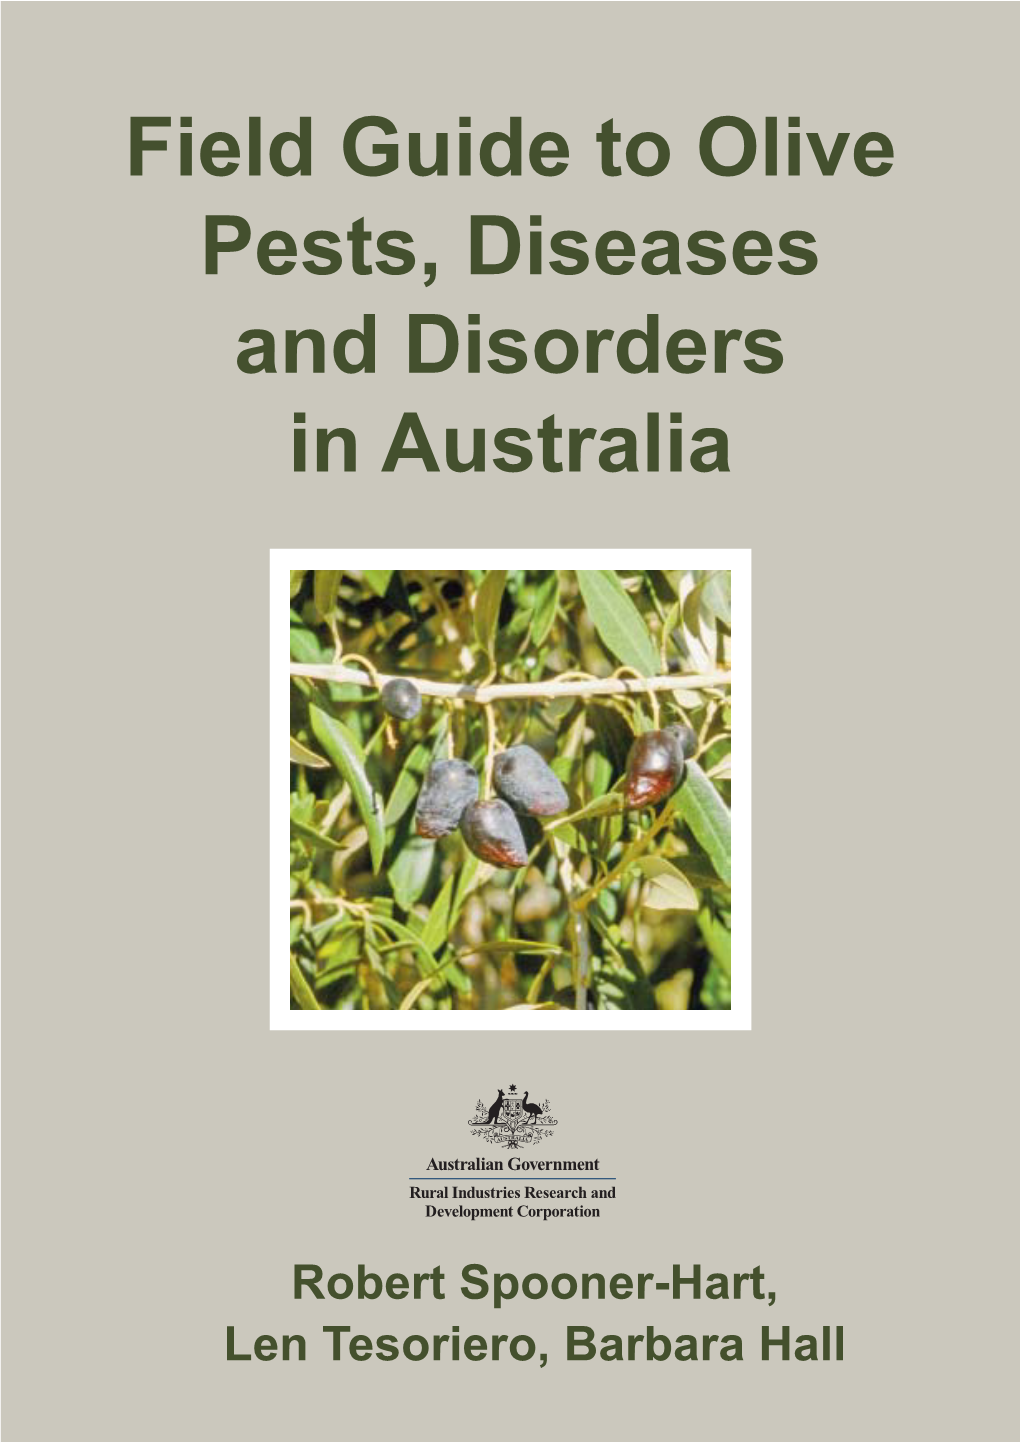 07-153 Field Guide to Olive Pests, Diseases and Disorders in Australia.Indd